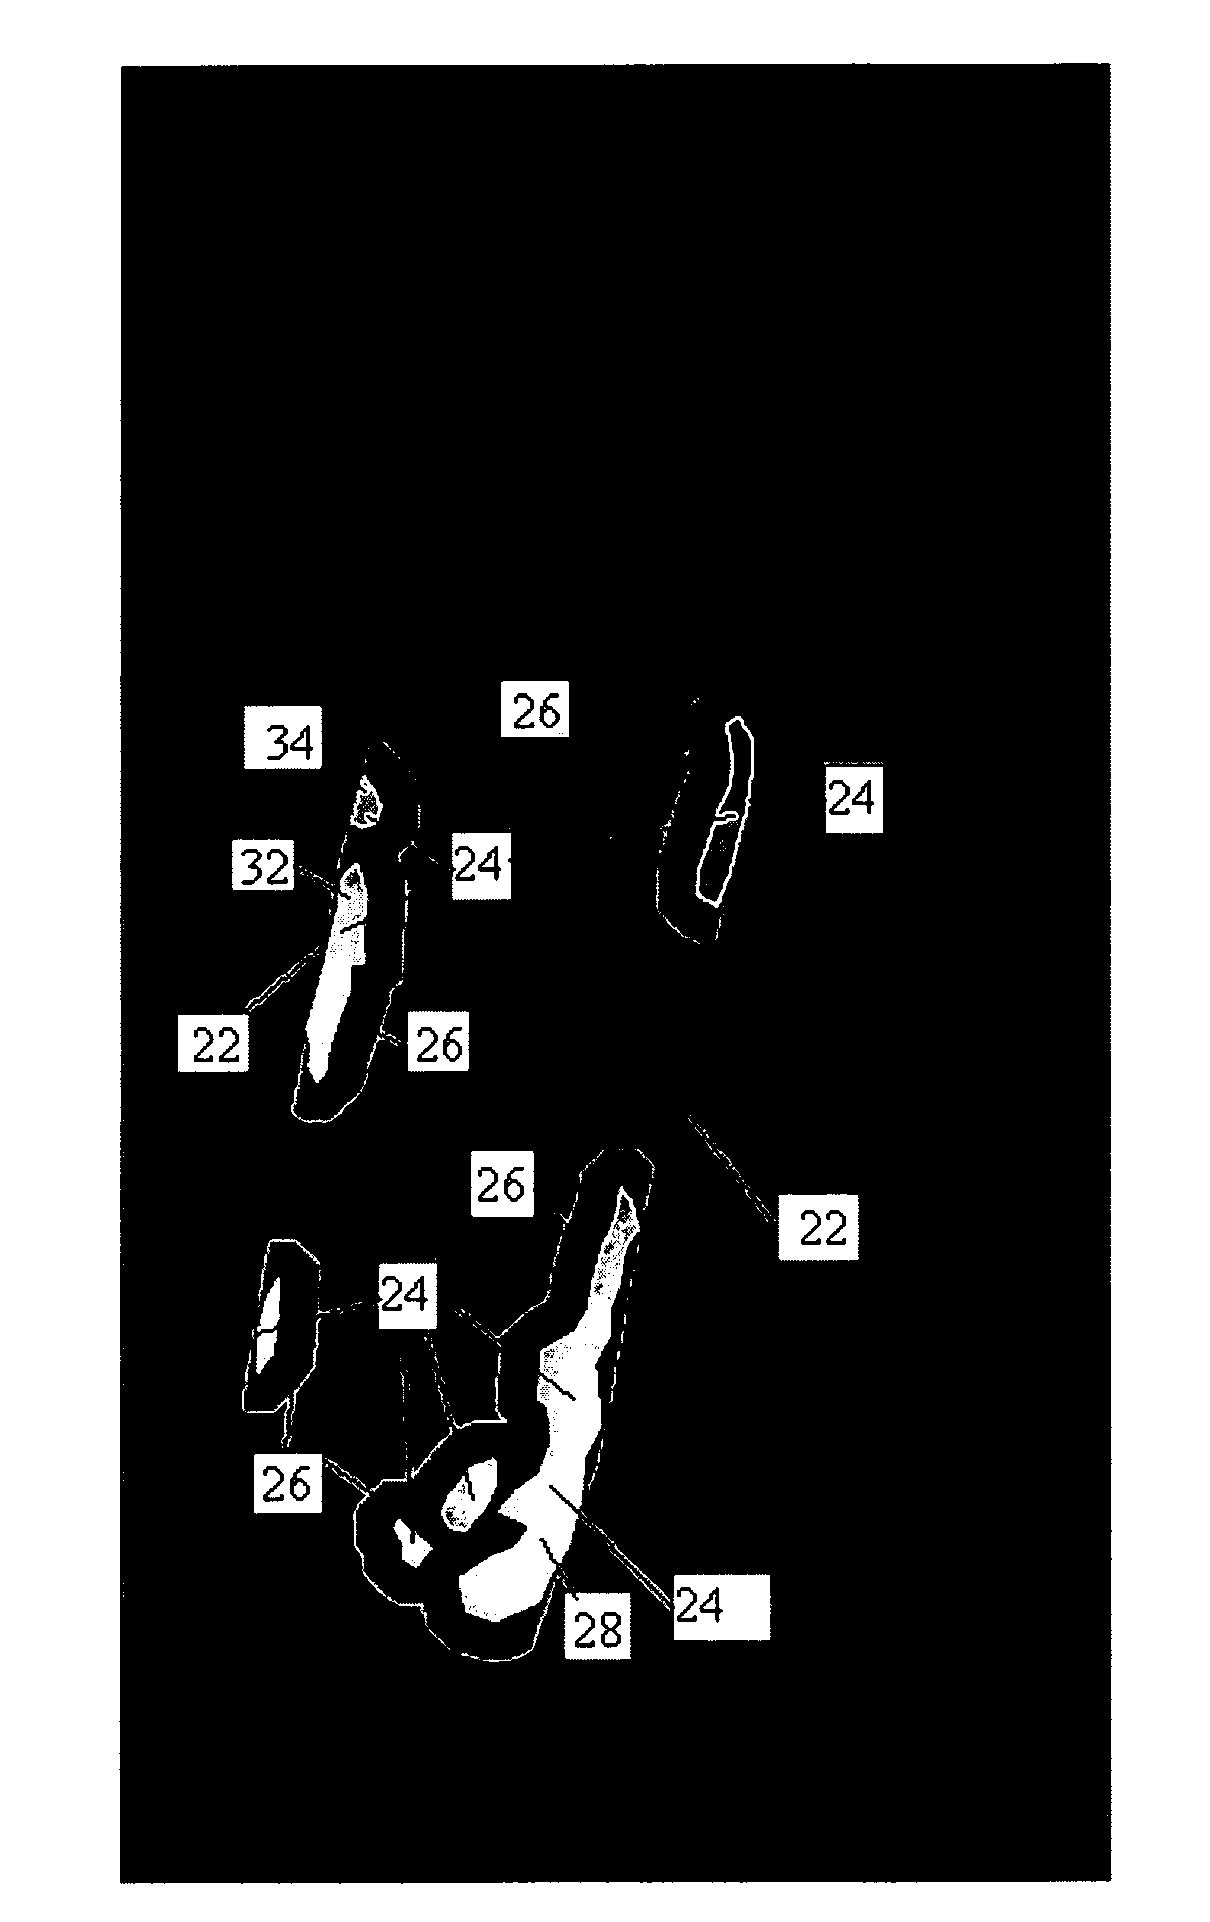 Method of deriving a quantitative measure of the instability of calcific deposits of a blood vessel